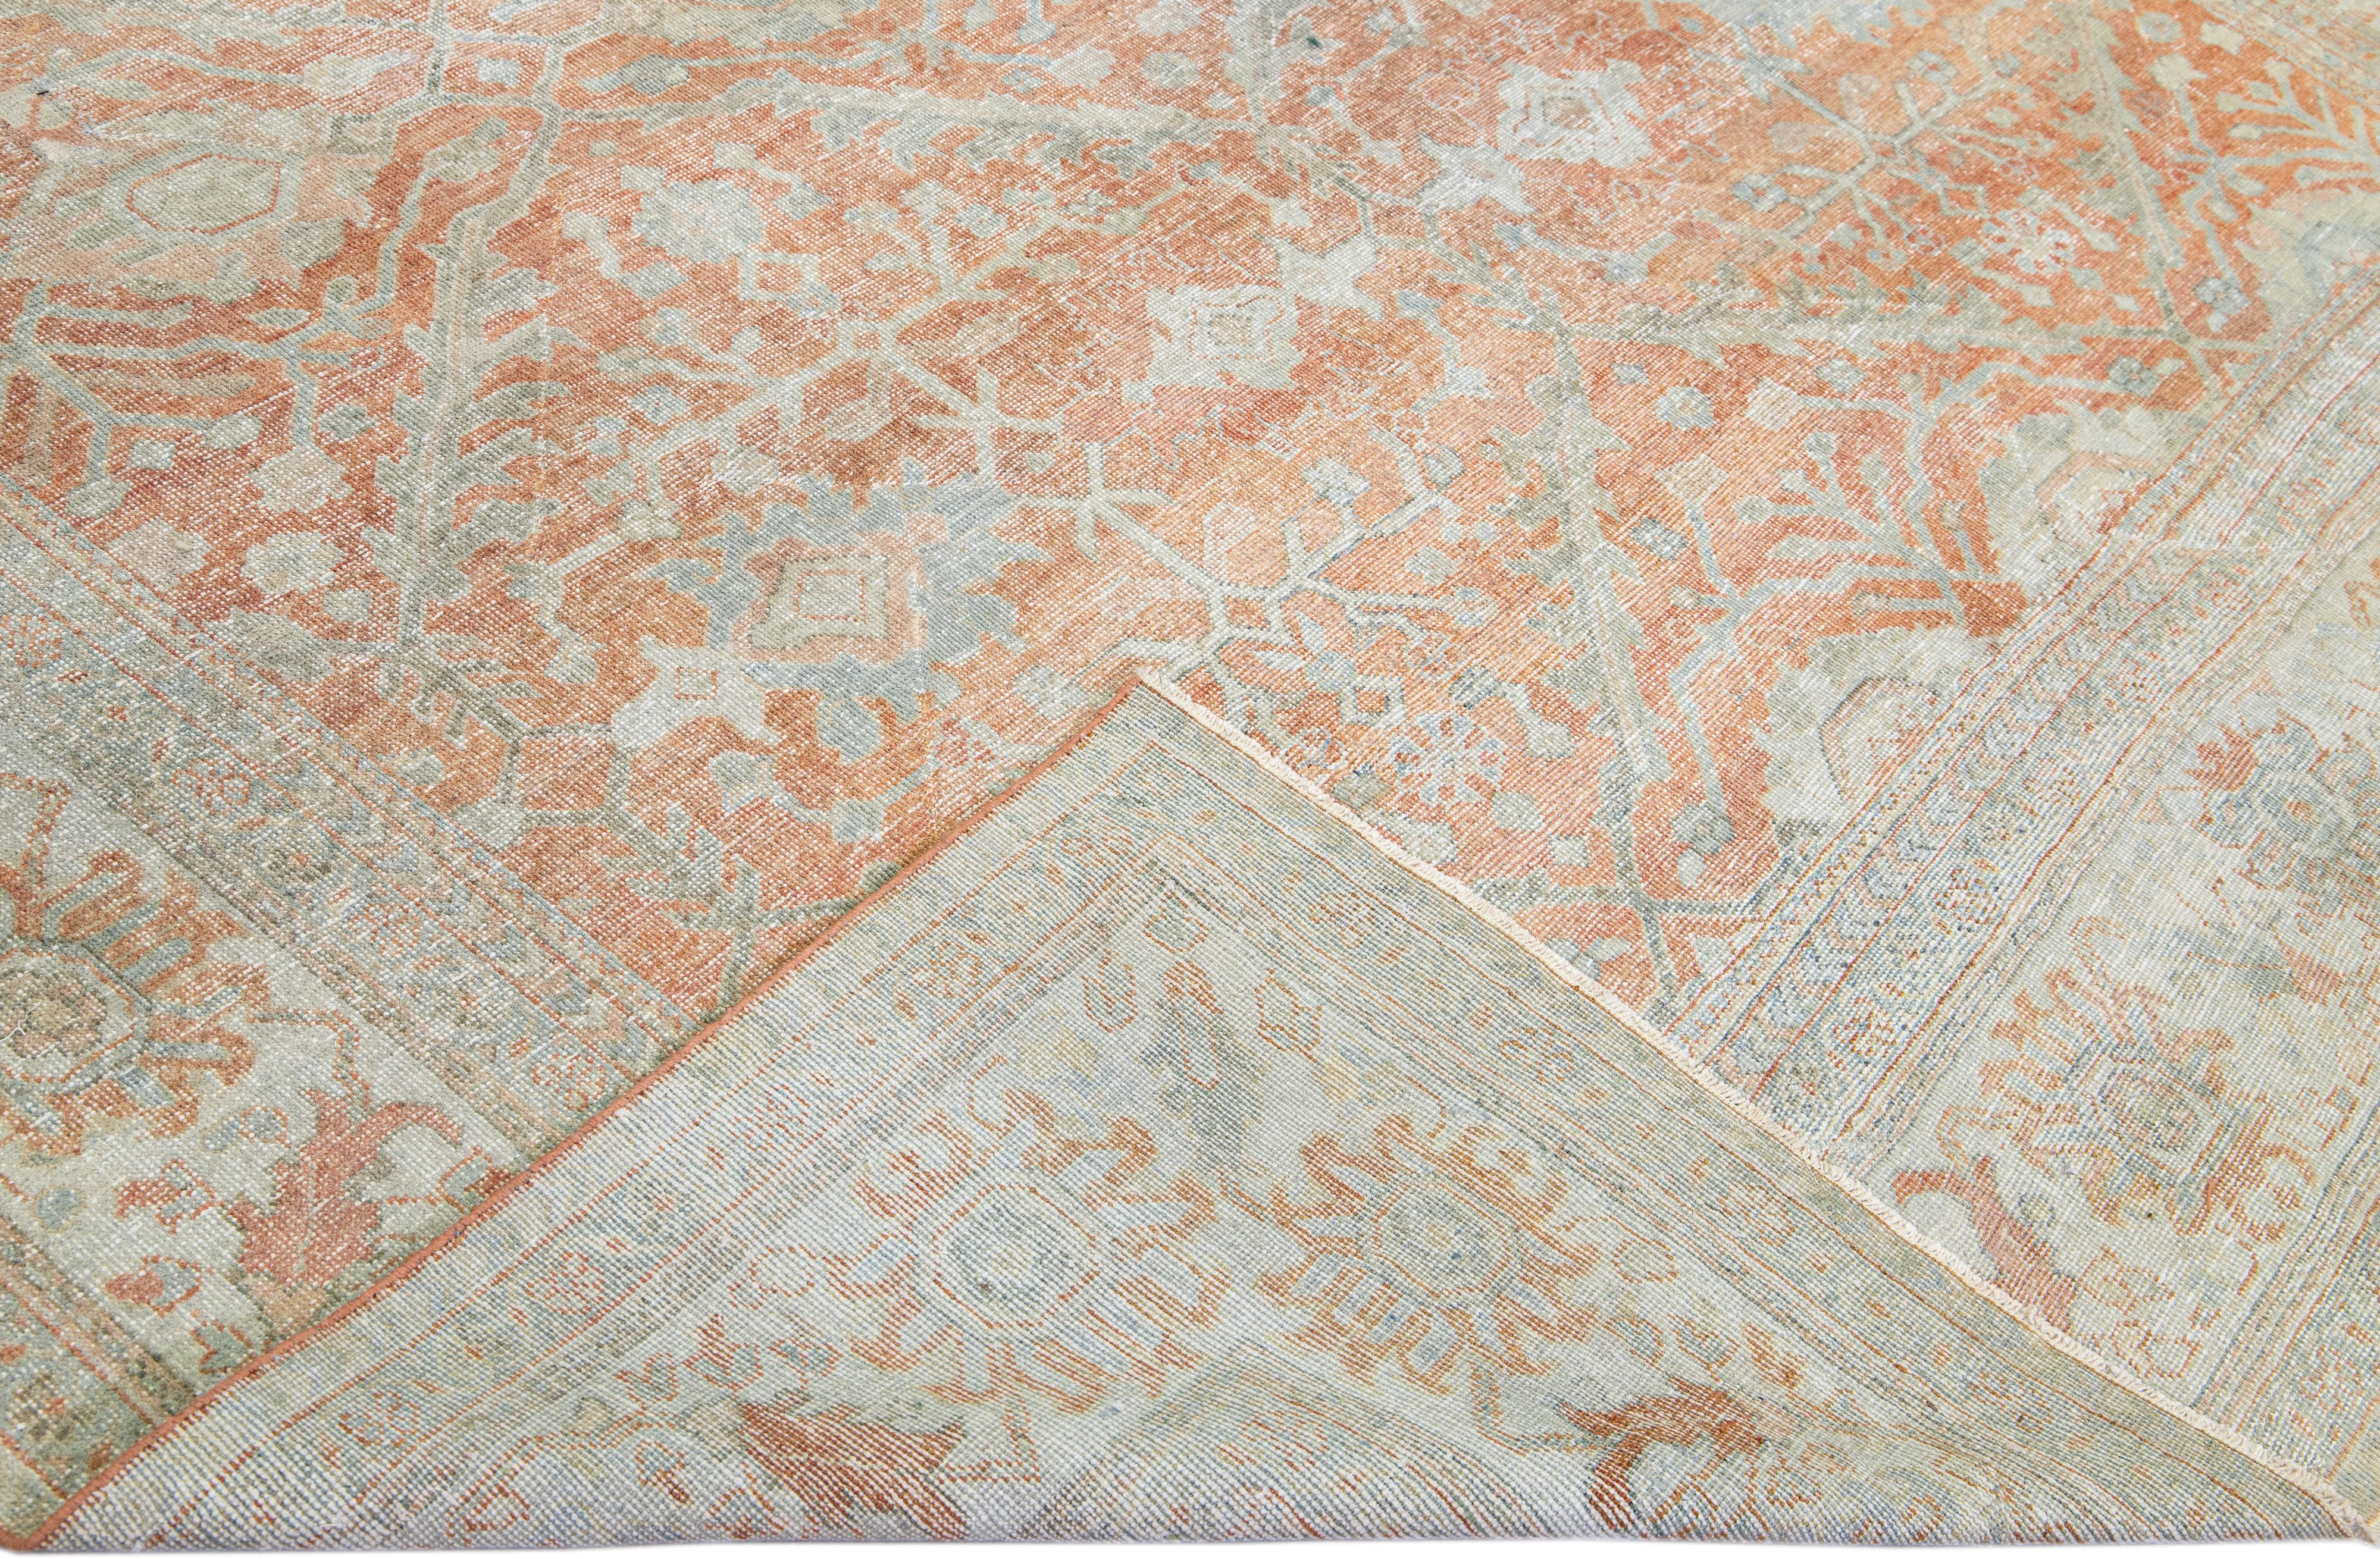 Beautiful antique Persian Sultanabad hand-knotted wool rug with an orange field. This piece has a light blue designed frame and gray accents in a gorgeous all-over floral pattern design.

This rug measures: 9' x 12'8